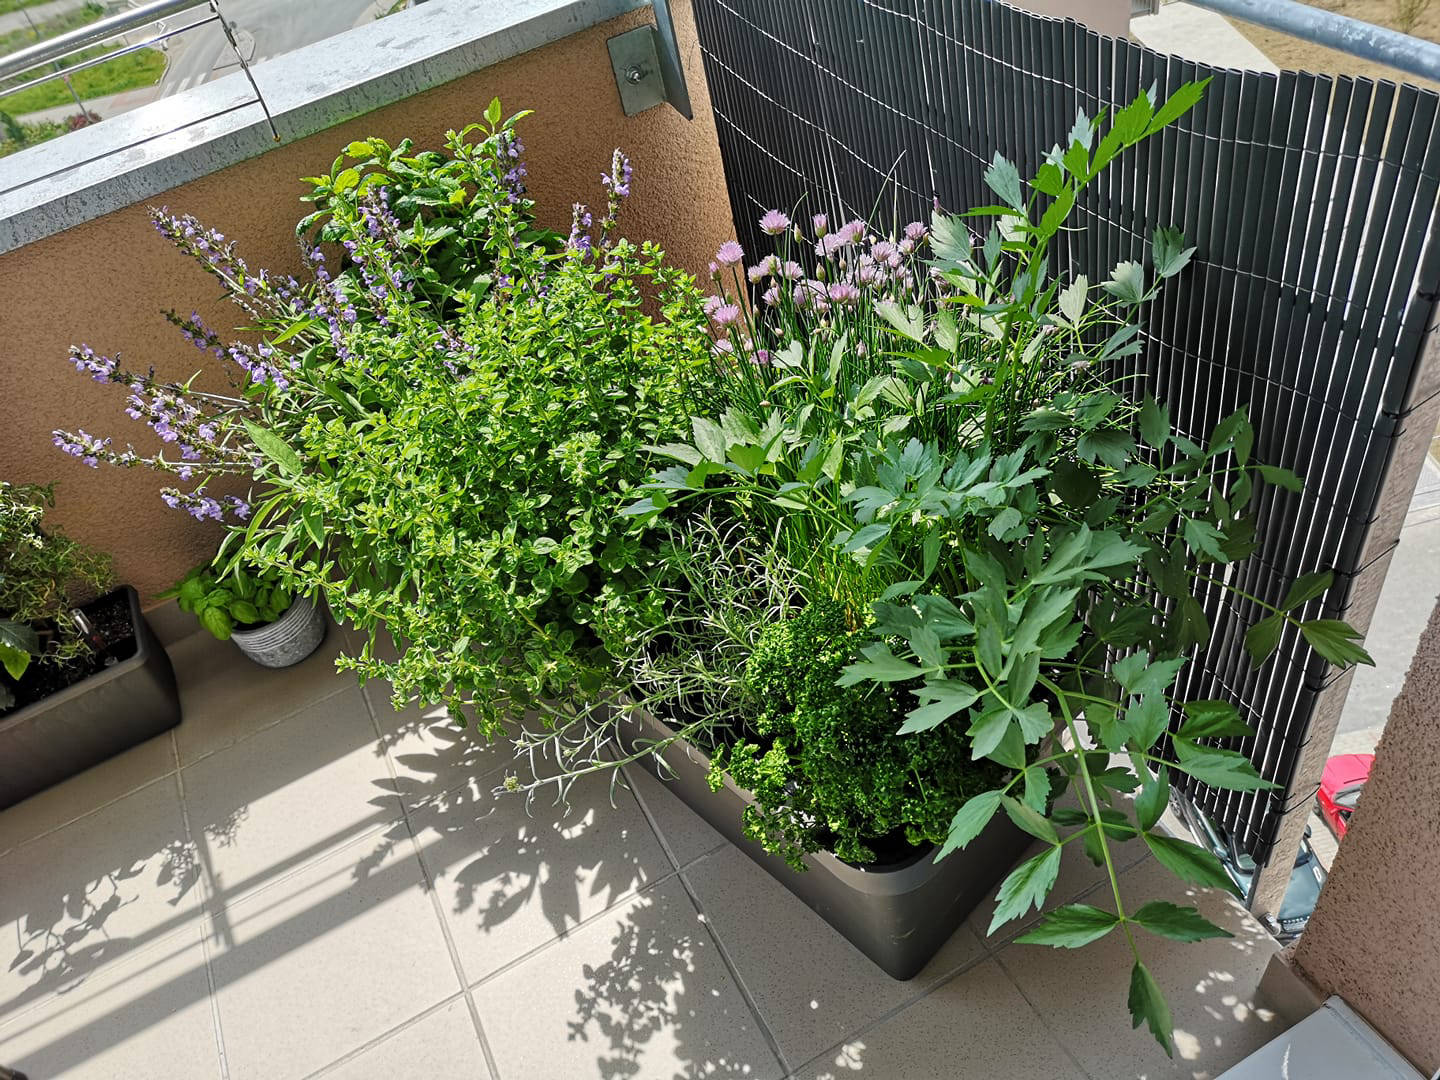 Hydrogel in pots with herbs on balcony